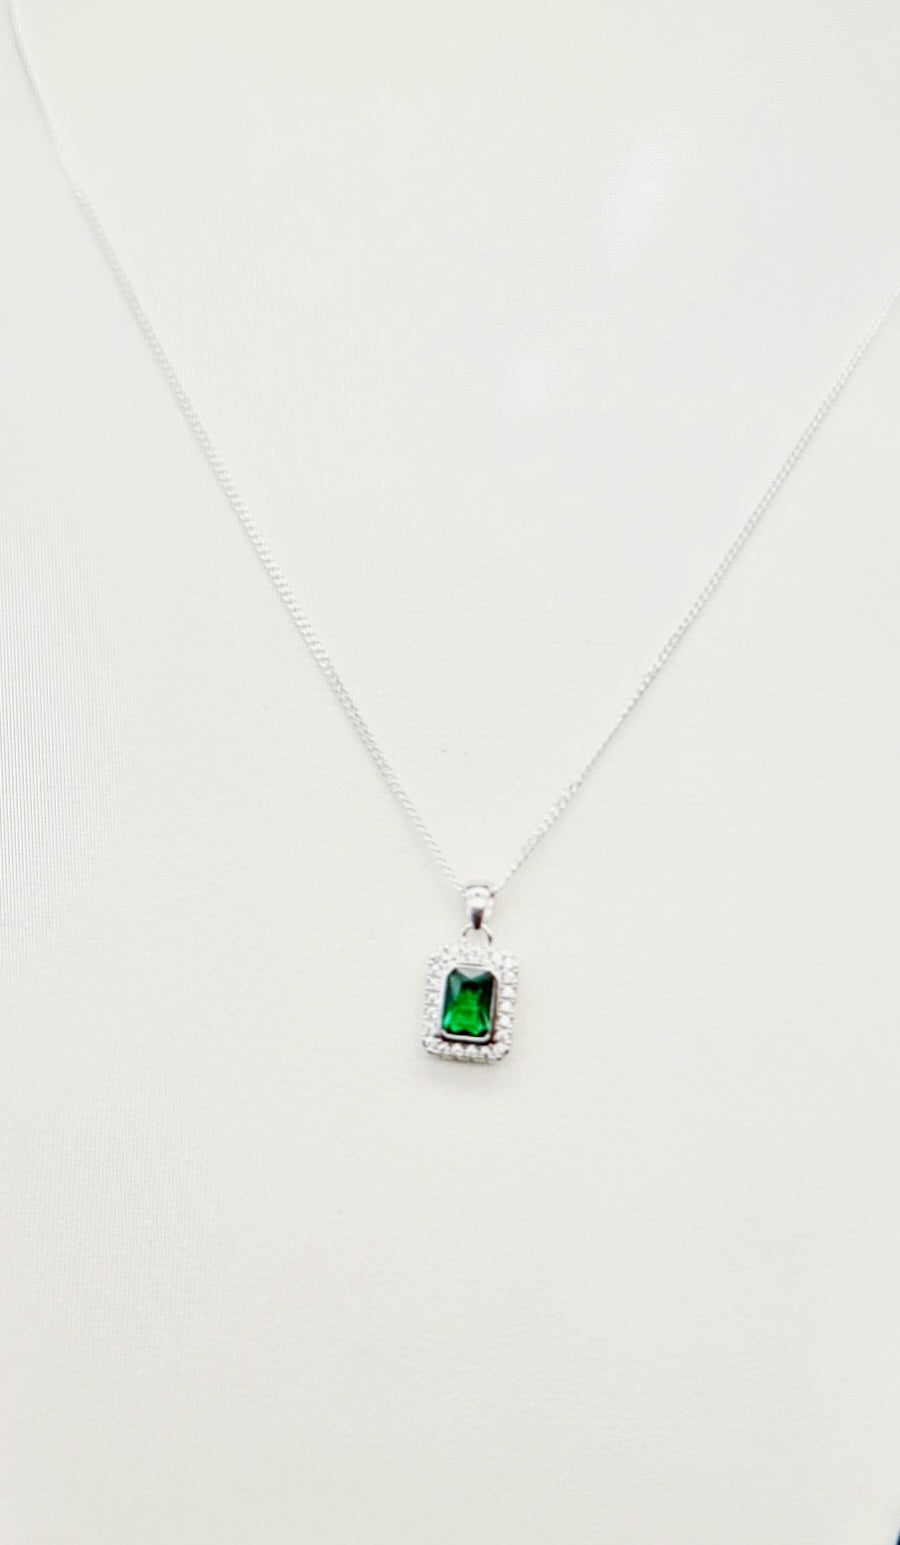 May Birthstone Necklace